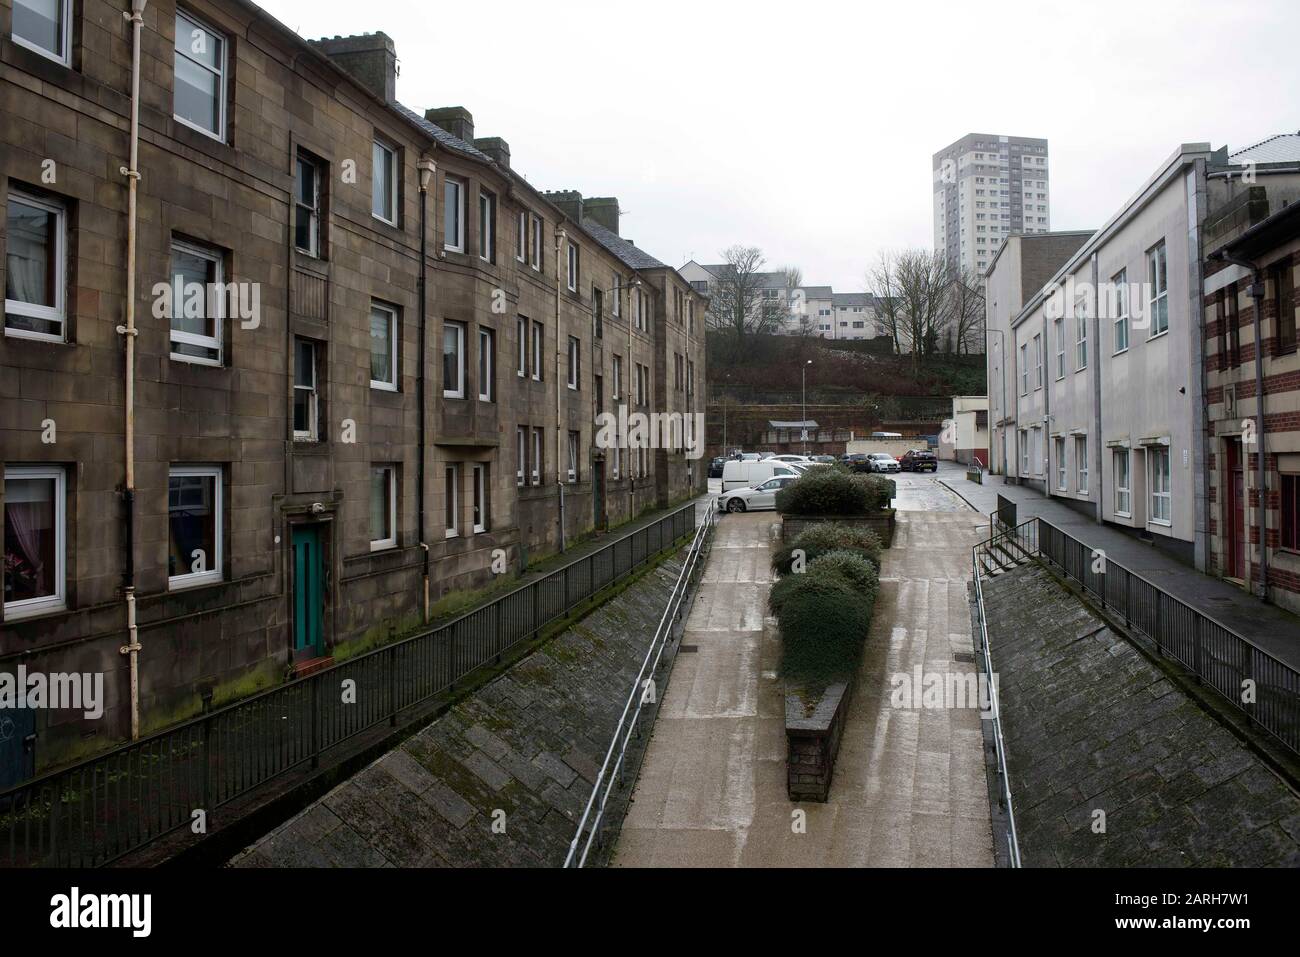 Greenock, Inverclyde, Scotland Greenock town centre has been named as the most deprived area in Scotland where residents are 4 times more likely to die that their richer counterparts. Credit: Chris McNulty/Alamy Live News Stock Photo